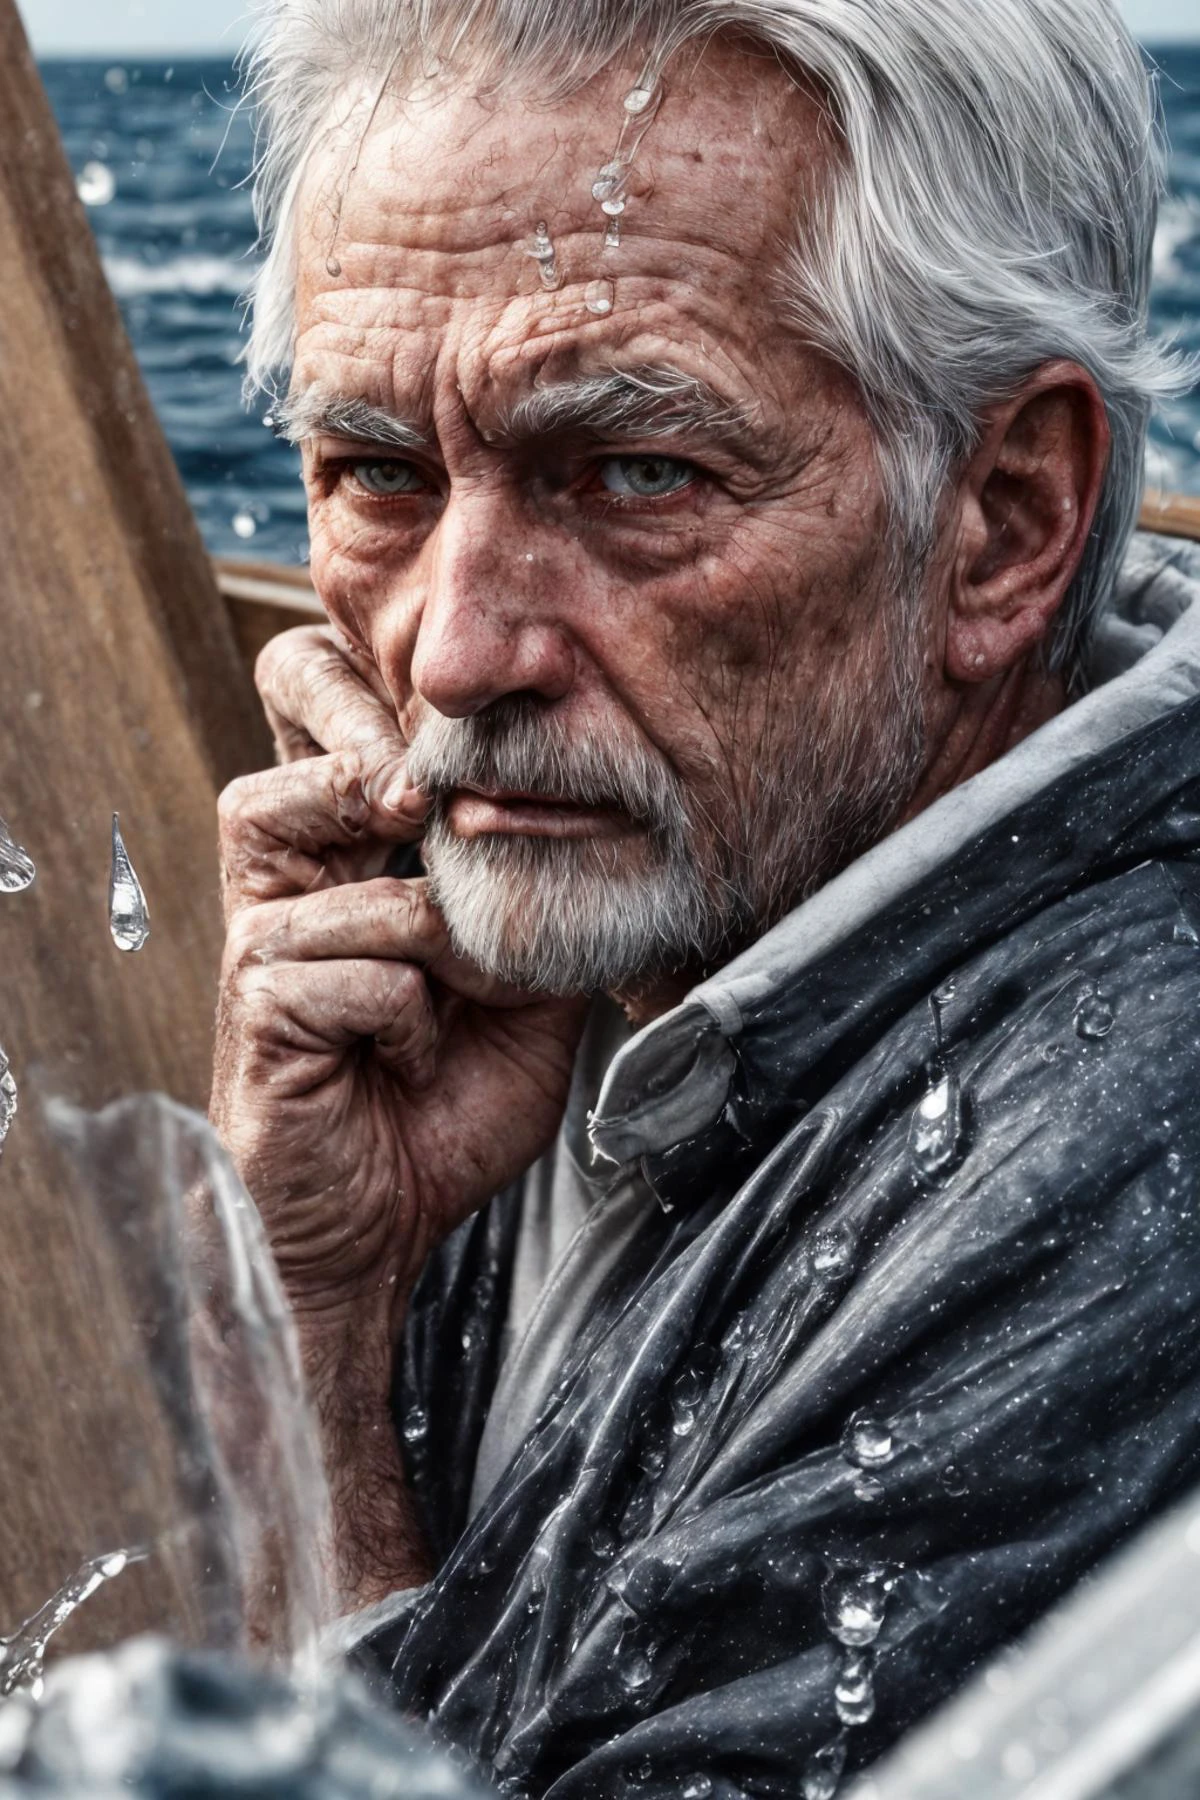 (RAW photo, 8k uhd, Analog style, Masterpiece, Best Quality, Highres:1.4), (dramatic, cinematic:1.2), BREAK,
movie shot of (80 yo:1.2) (old male:1.3) (fisherman:1.25) (sailor man:1.25) (sitting:1.1) (on deck:1.35) of (old dilapidated:1.2) (wooden sailboat:1.3), against railing, (from side:1.2), (stern face:1.2), (deep wrinkles:1.2), (gray long beard:1.3), (grey eyes:1.2), ((shabby:1.2) old (torn:1.15) (raincoat:1.1), brown (pants:1.1), (sailor hat:1.1) (sou'wester:1.2), jackboots:1.1), (lowered head:1.2), (tired sad expression:1.15), BREAK,
(stormy sea, gloomy dark clouds:1.2) on background, (splashes, water drops, rain:1.25), (seafoam:1.1), (flying white seagulls:1.25), (rocks, cliffs:1.3), (dark haze:1.2), (wet clothes:1.1), fishing (nets with fish:1.3) on deck, (ropes:1.1), (tense hopeless eerie atmosphere, cold, floes:1.2), BREAK,
(photorealistic:1.3), (rough details, (male focus:1.1):1.2), (desaturated, cold lighting:1.3), (hyperdetailed, absurdres:1.2), BREAK,
